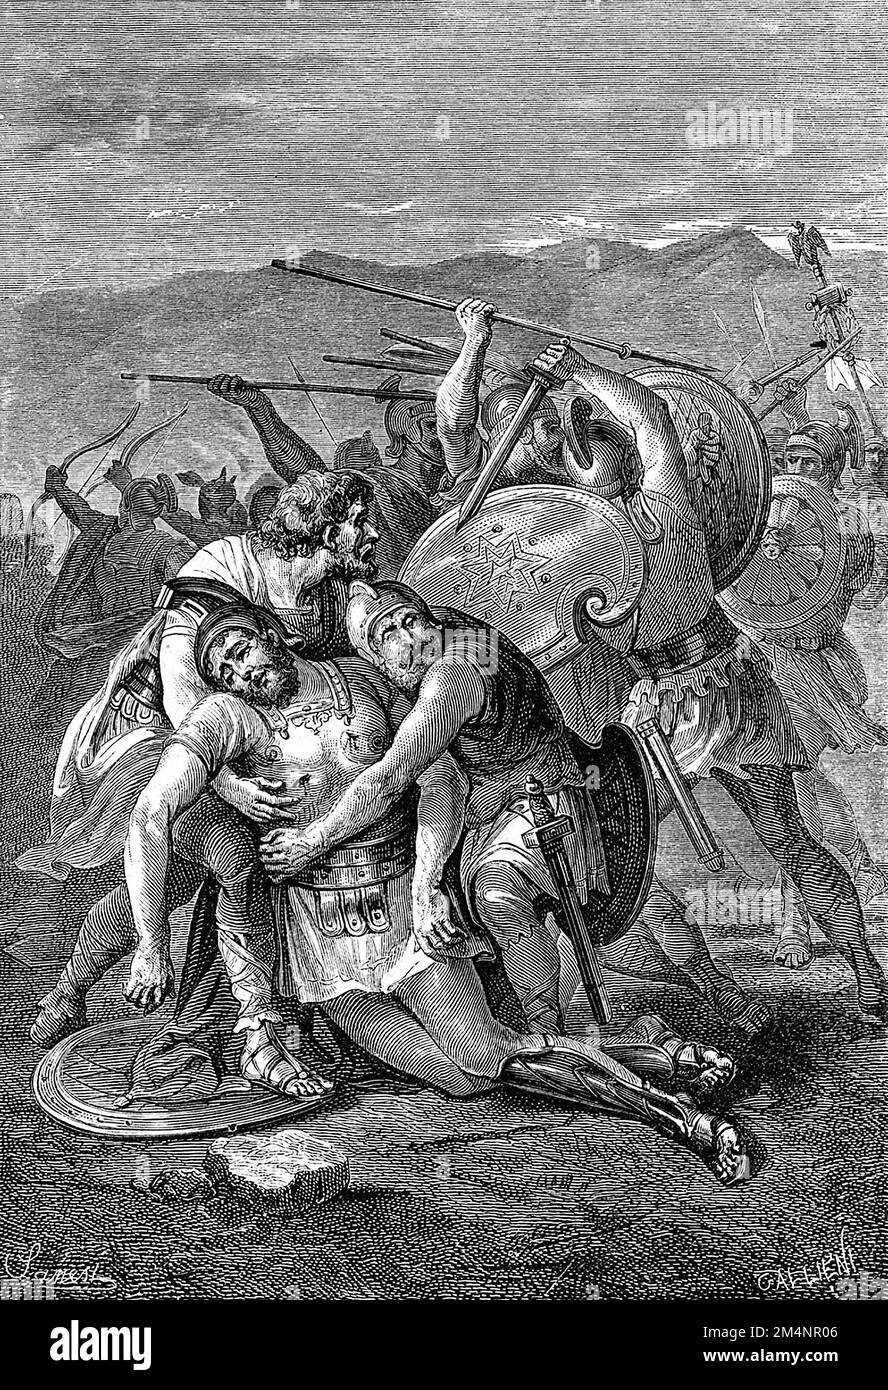 Spartacus (c. 103BC-71BC). Engraving entitled ' Slave Revolt in the Final Battle, Crassus Defeats the Slaves and Spartacus is Killed', by Nicola Sanesi Stock Photo